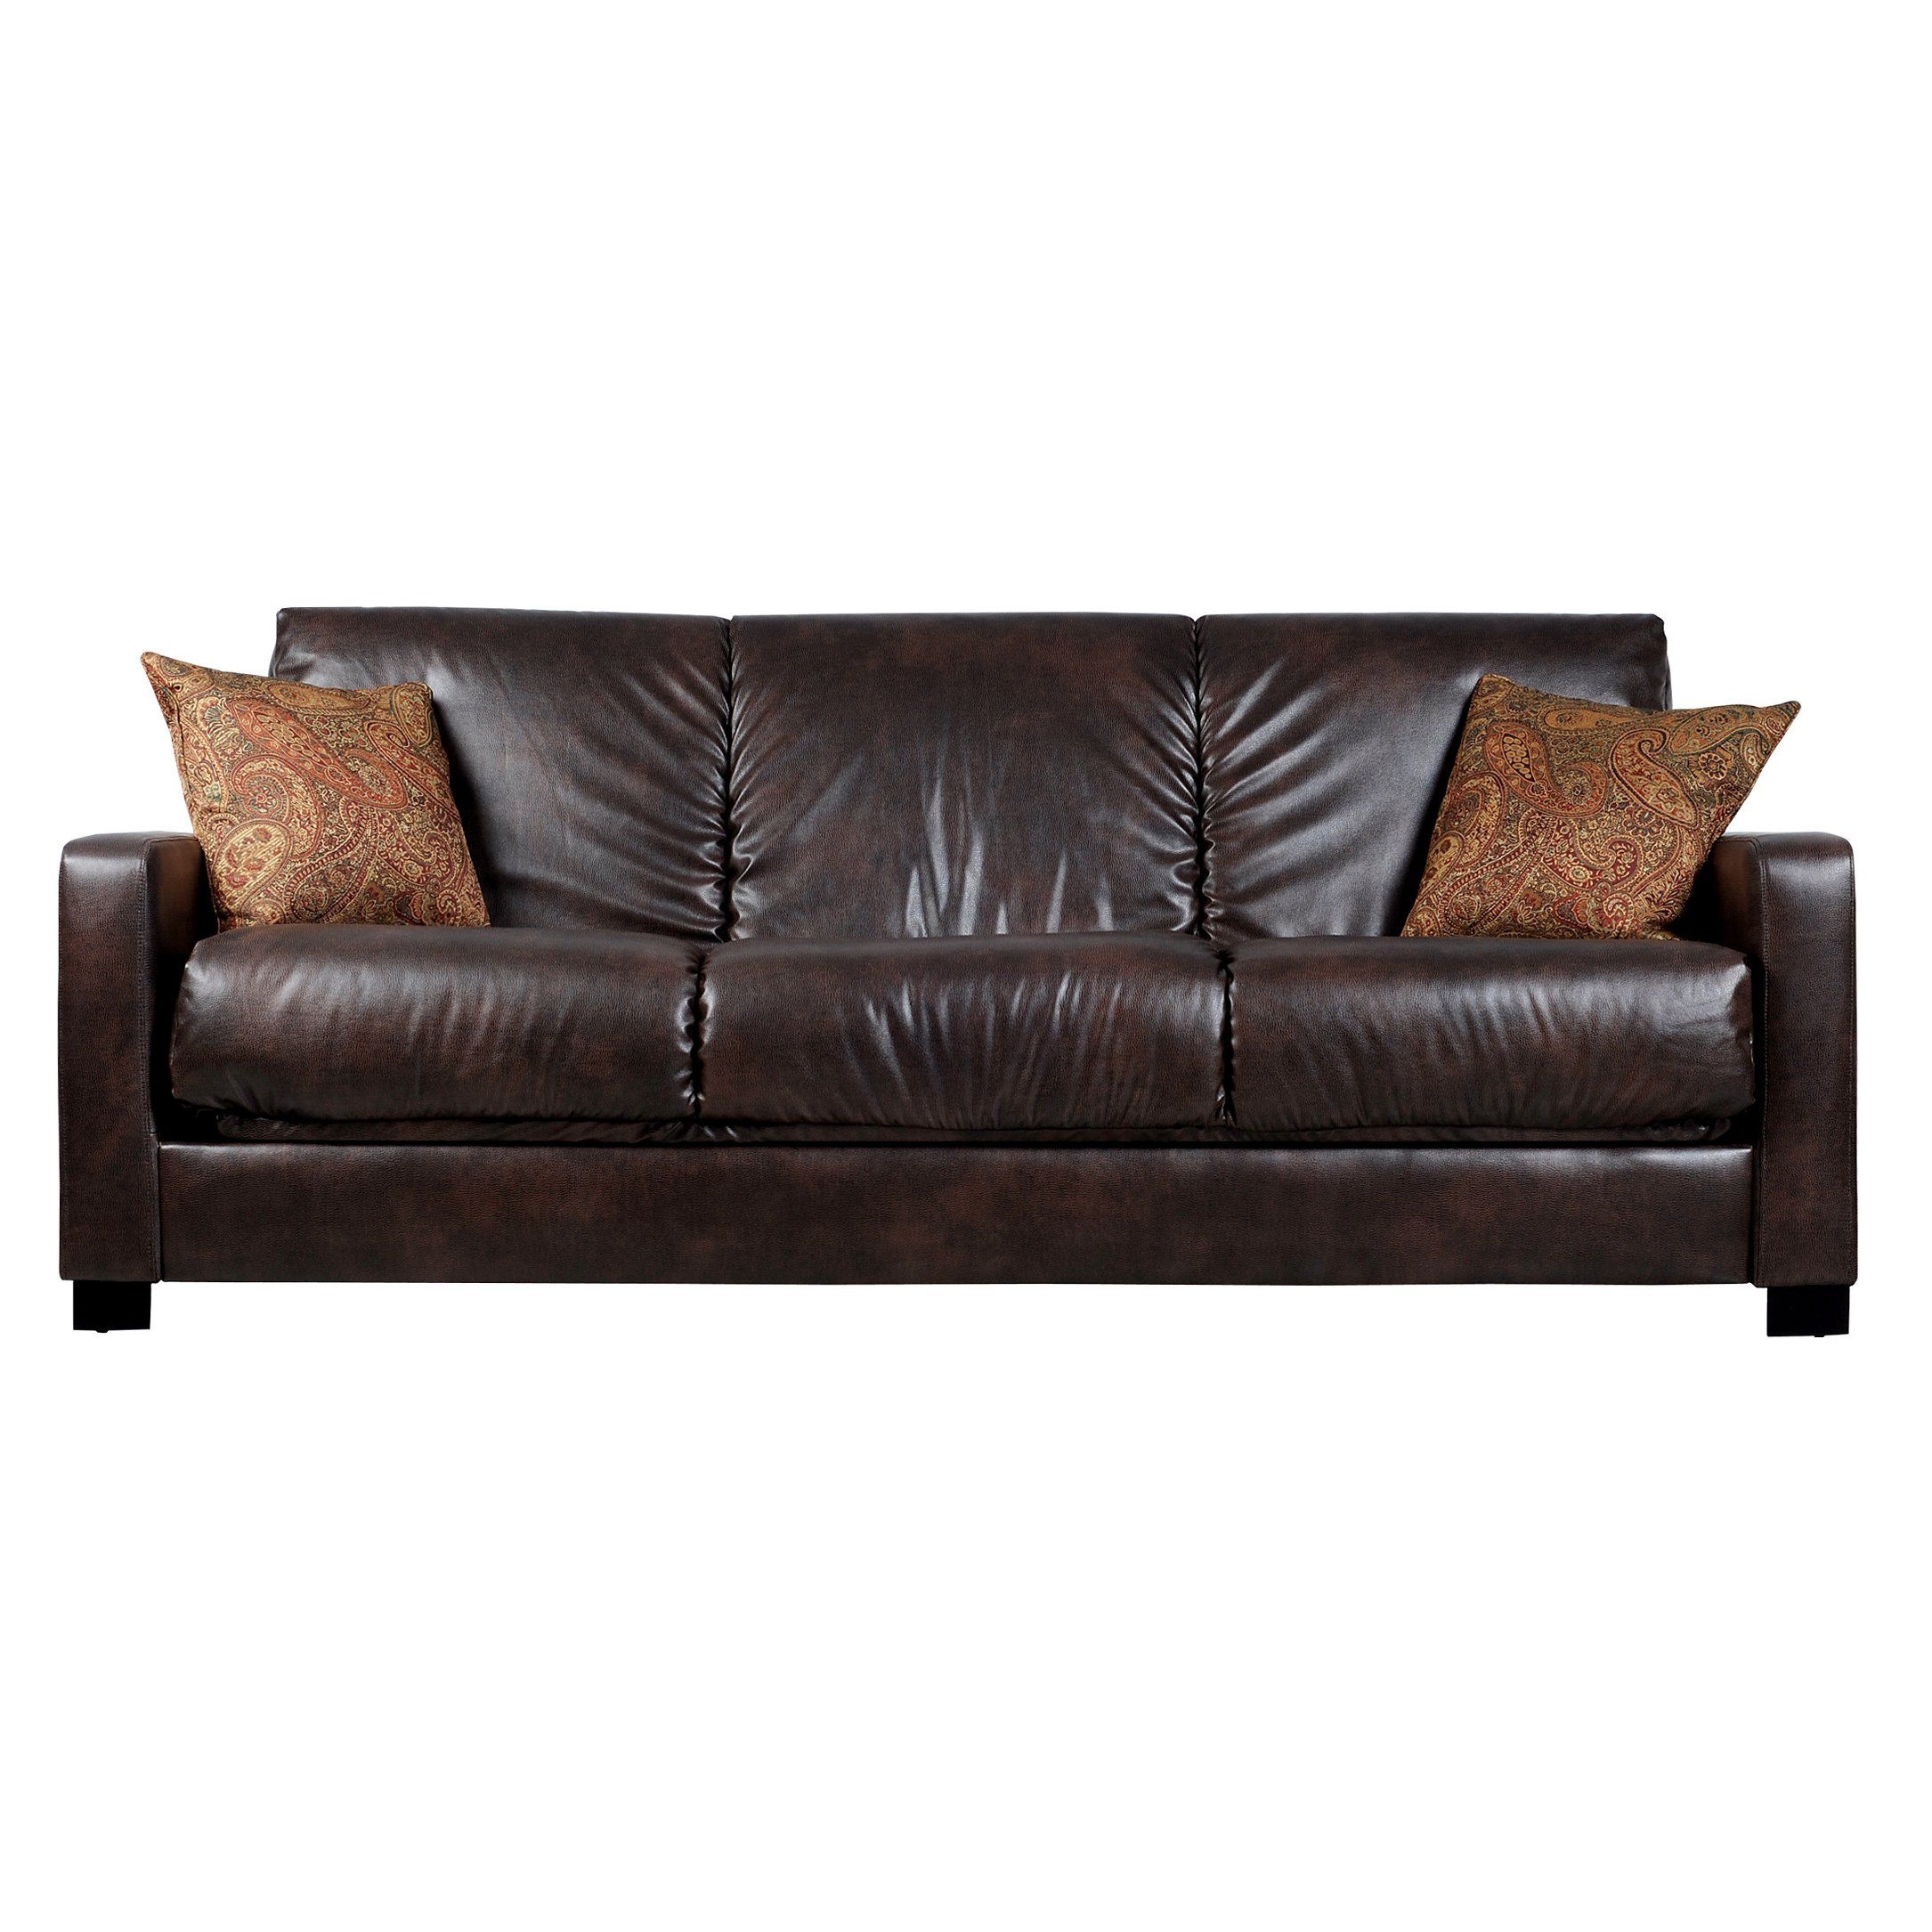 Trace convert a couch brown renu leather futon sofa sleeper